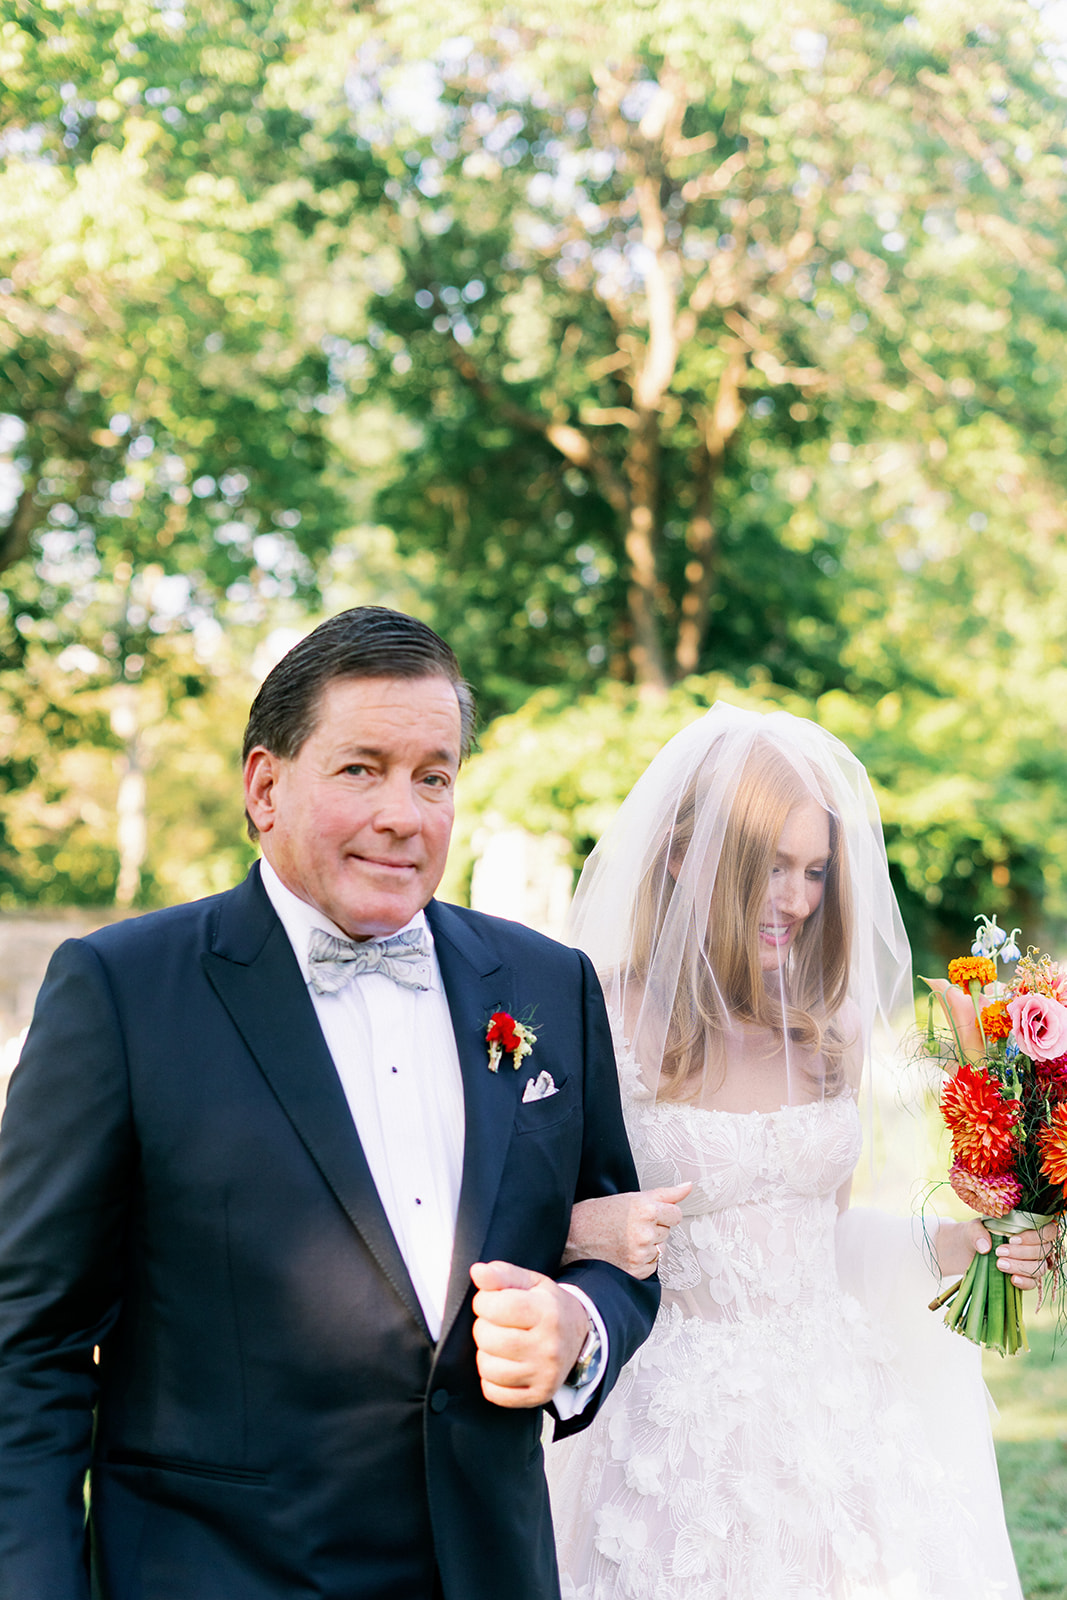 Bride walking down the aisle linking arms with her dad and holding a vibrant wildflower bouquet.